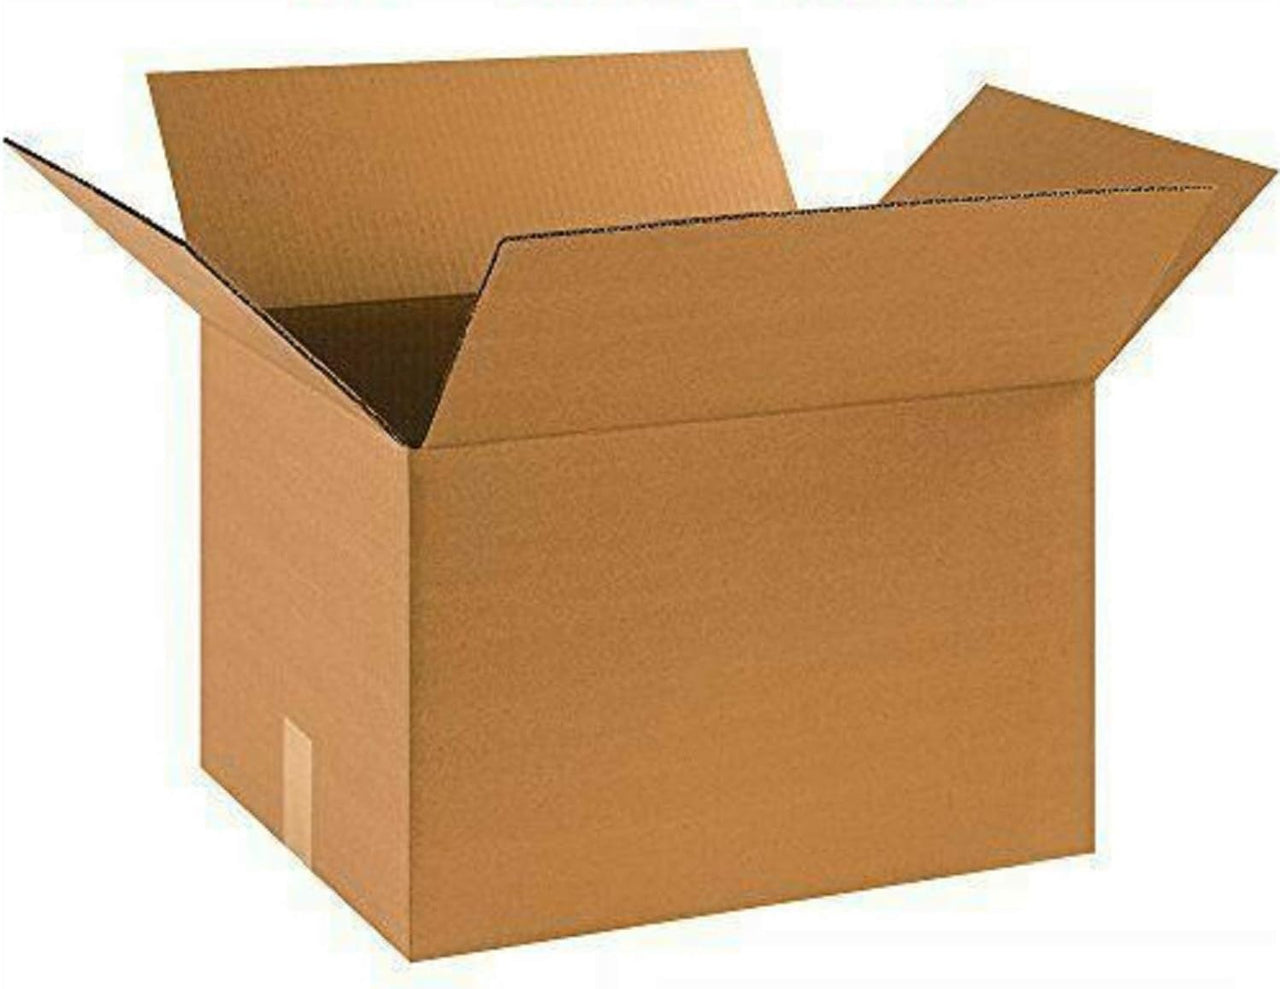 Shipping Boxes 15"L x 15"W x 15"H 50-Pack Corrugated Cardboard Box for Packing Moving Storage